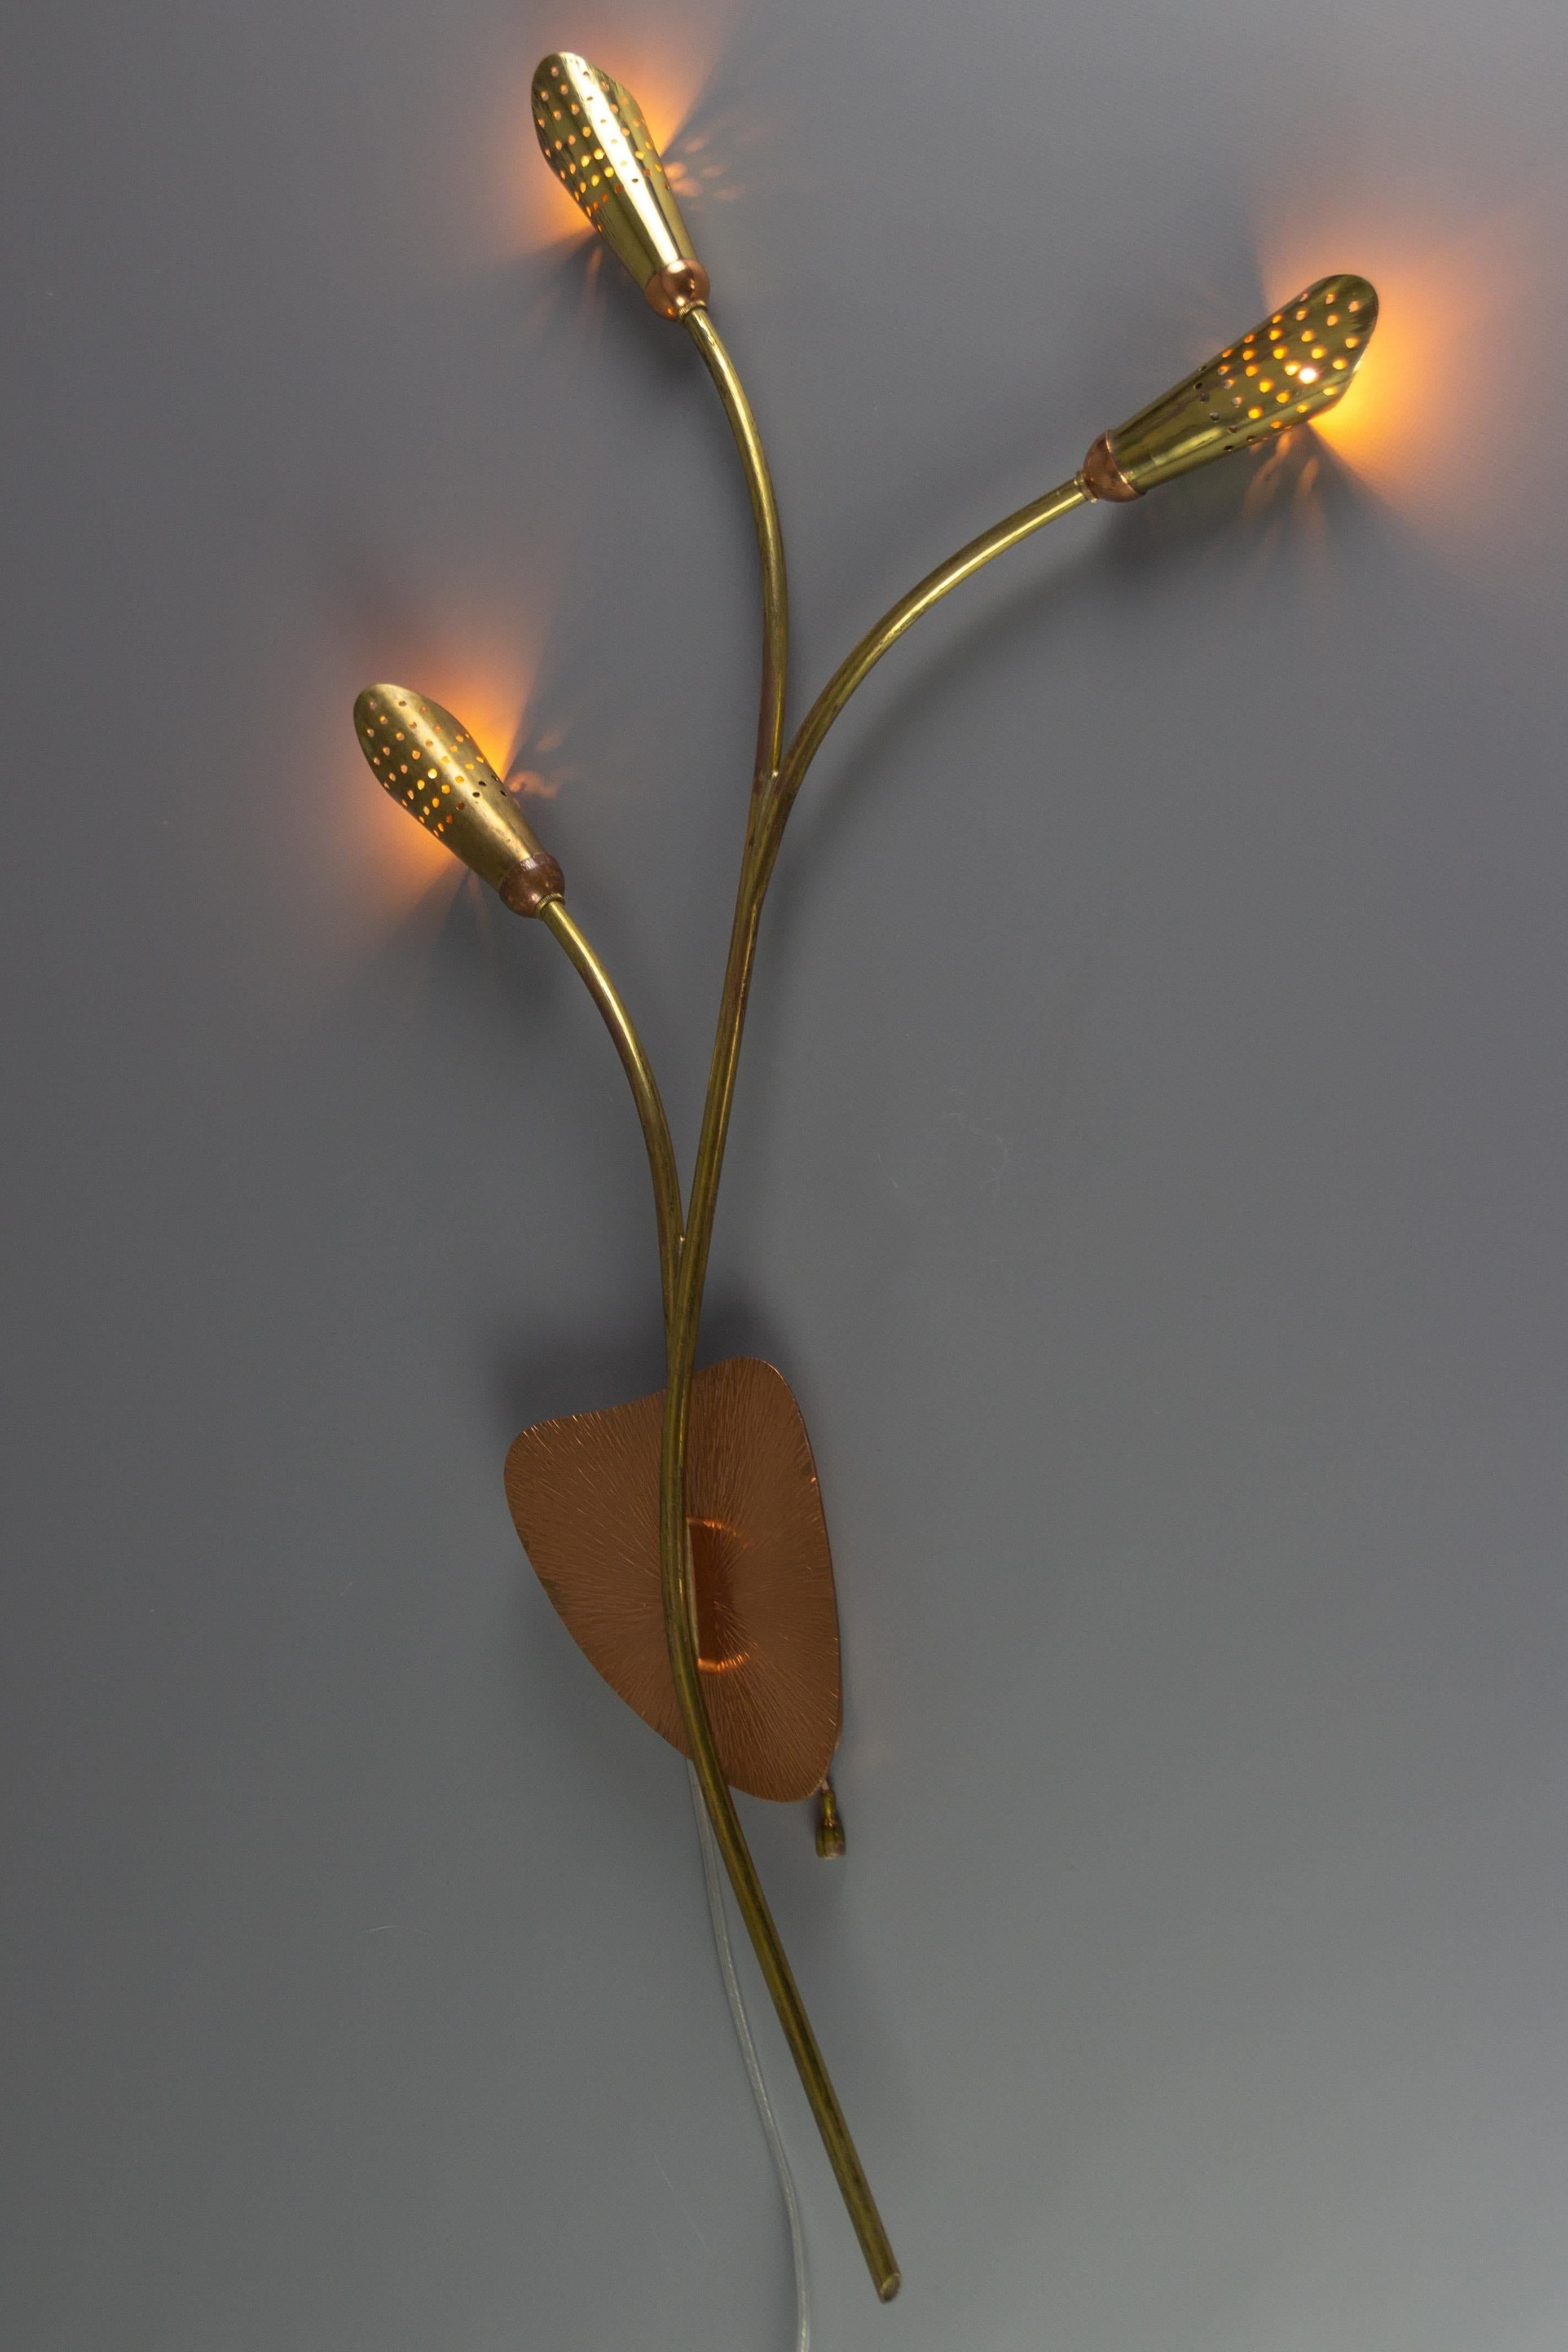 A charming Mid-Century Modern brass and copper sconce, Germany, 1970s. This beautiful wall lamp has three perforated cone-shaped shades that create a romantic diffusion of light. A real eye-catcher is a decorative base with a sunburst-like